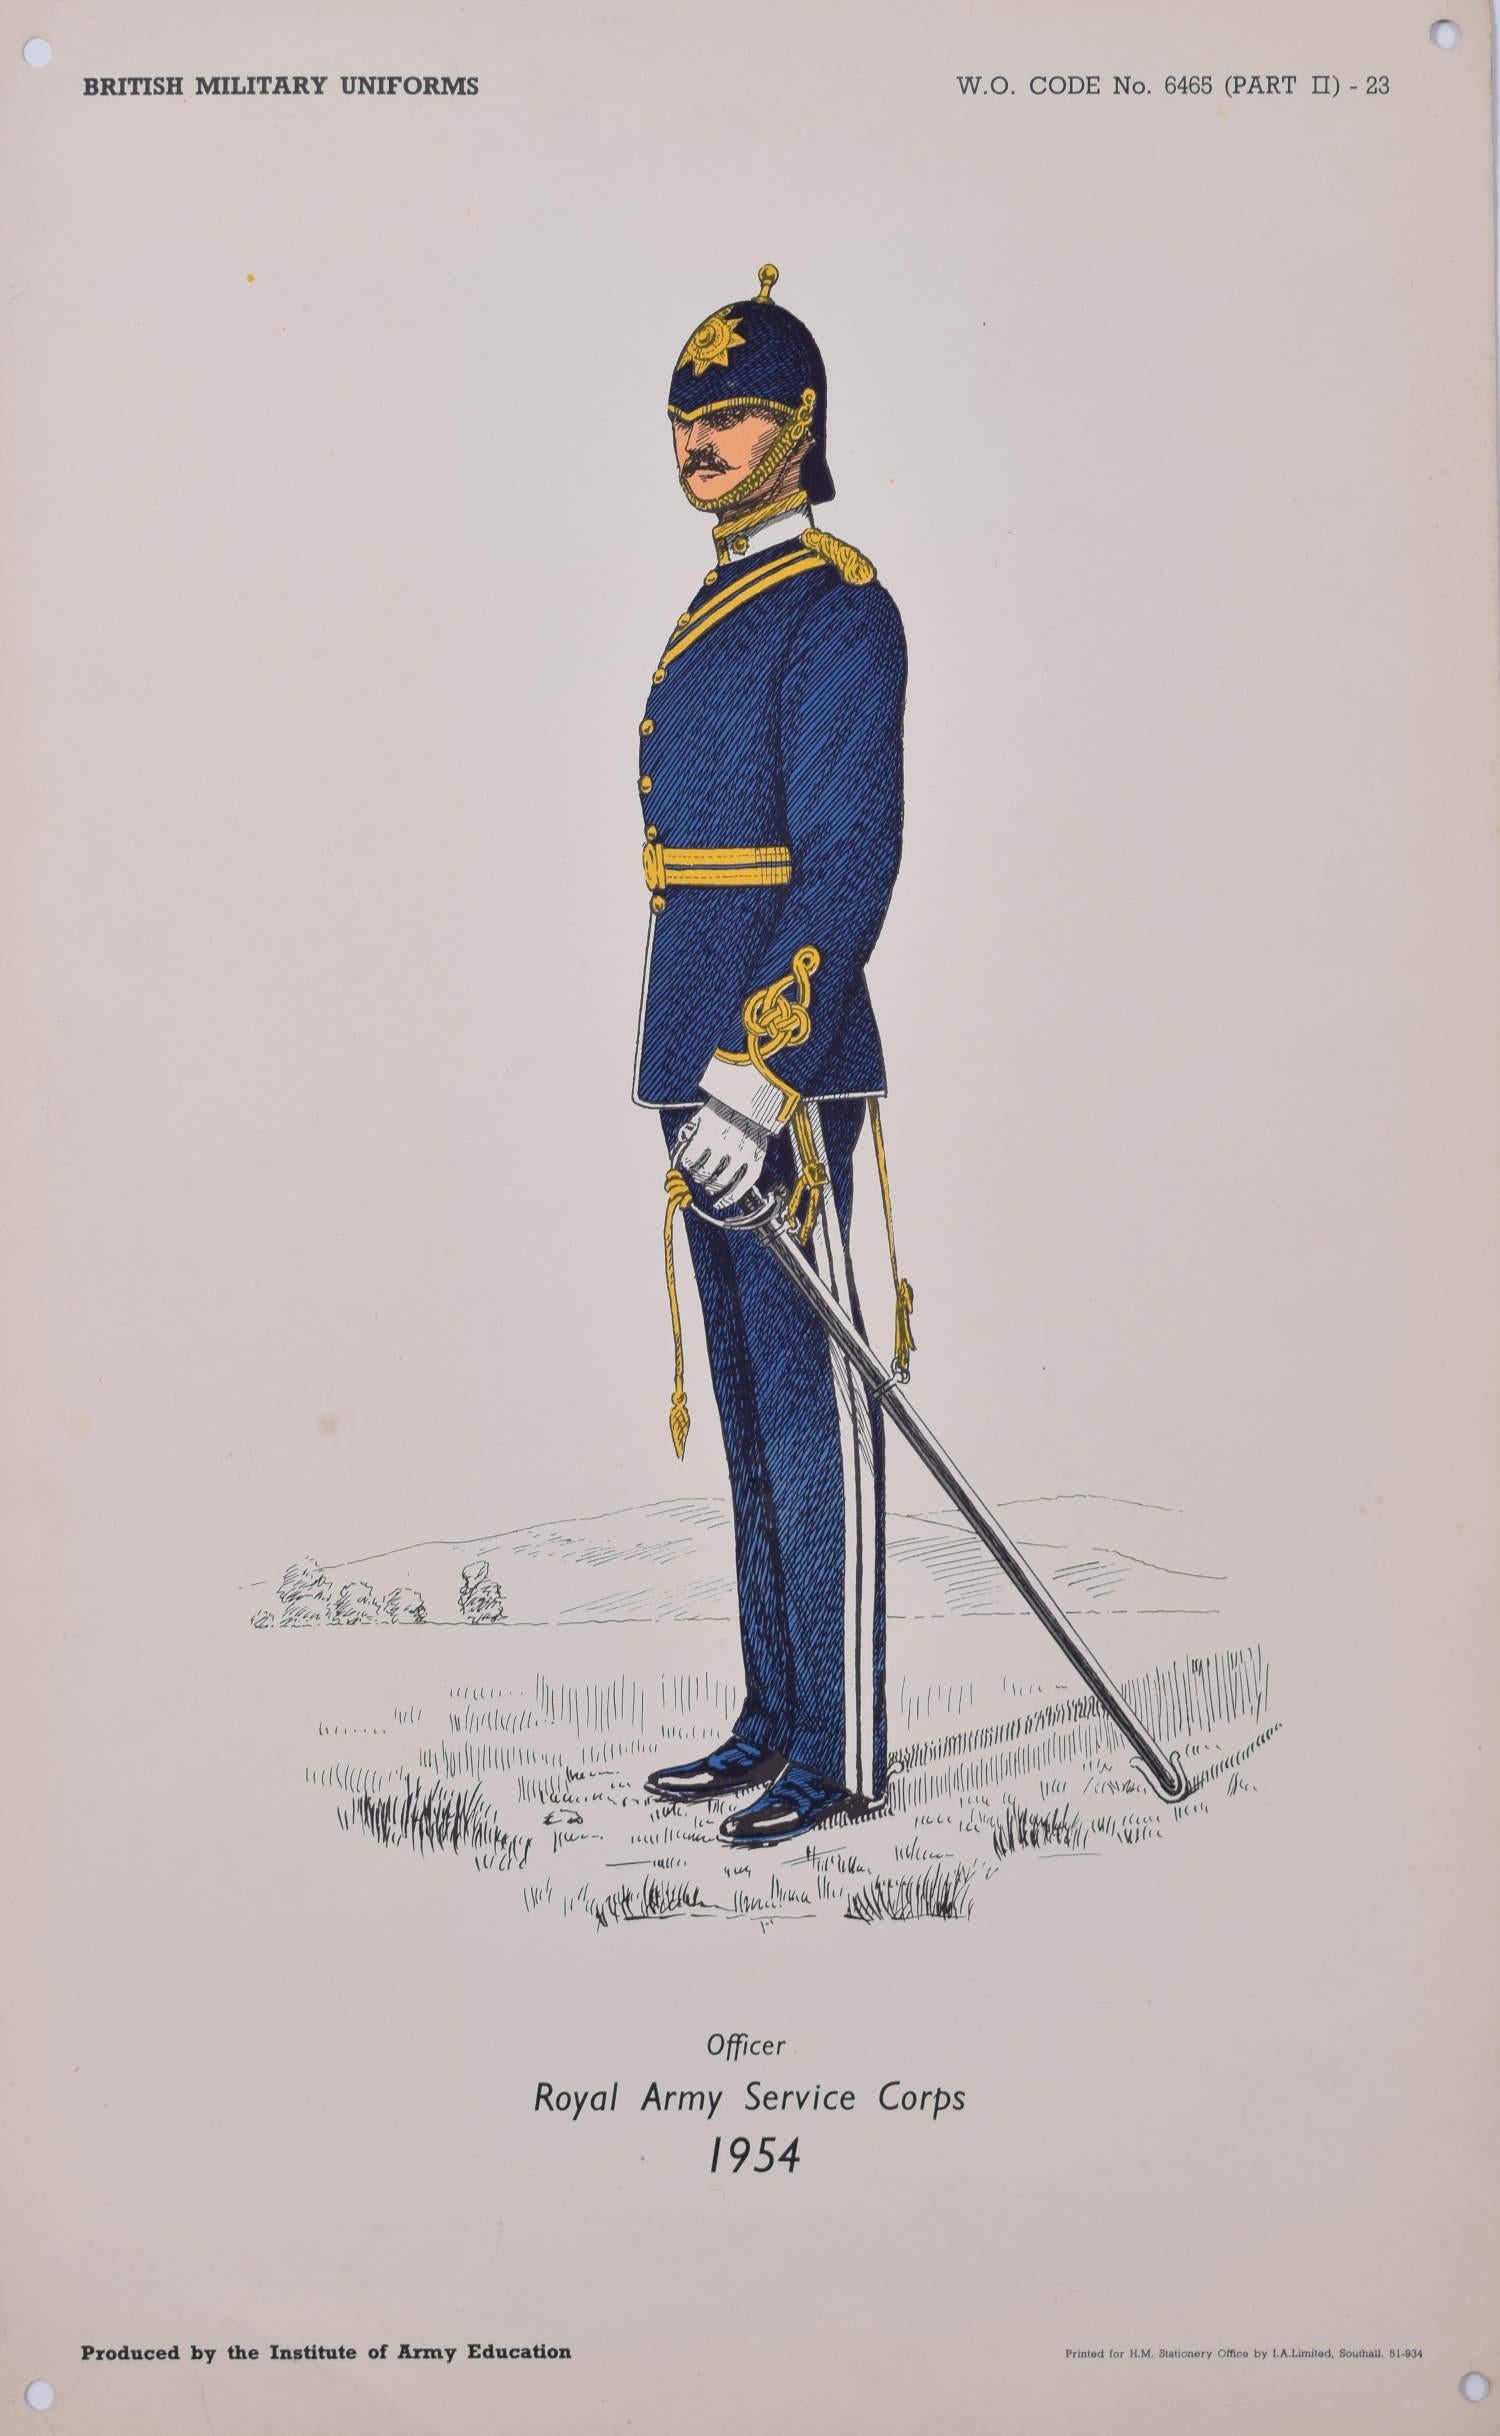 Unknown Portrait Print - Royal Army Service Corps Institute of Army Education military uniform lithograph